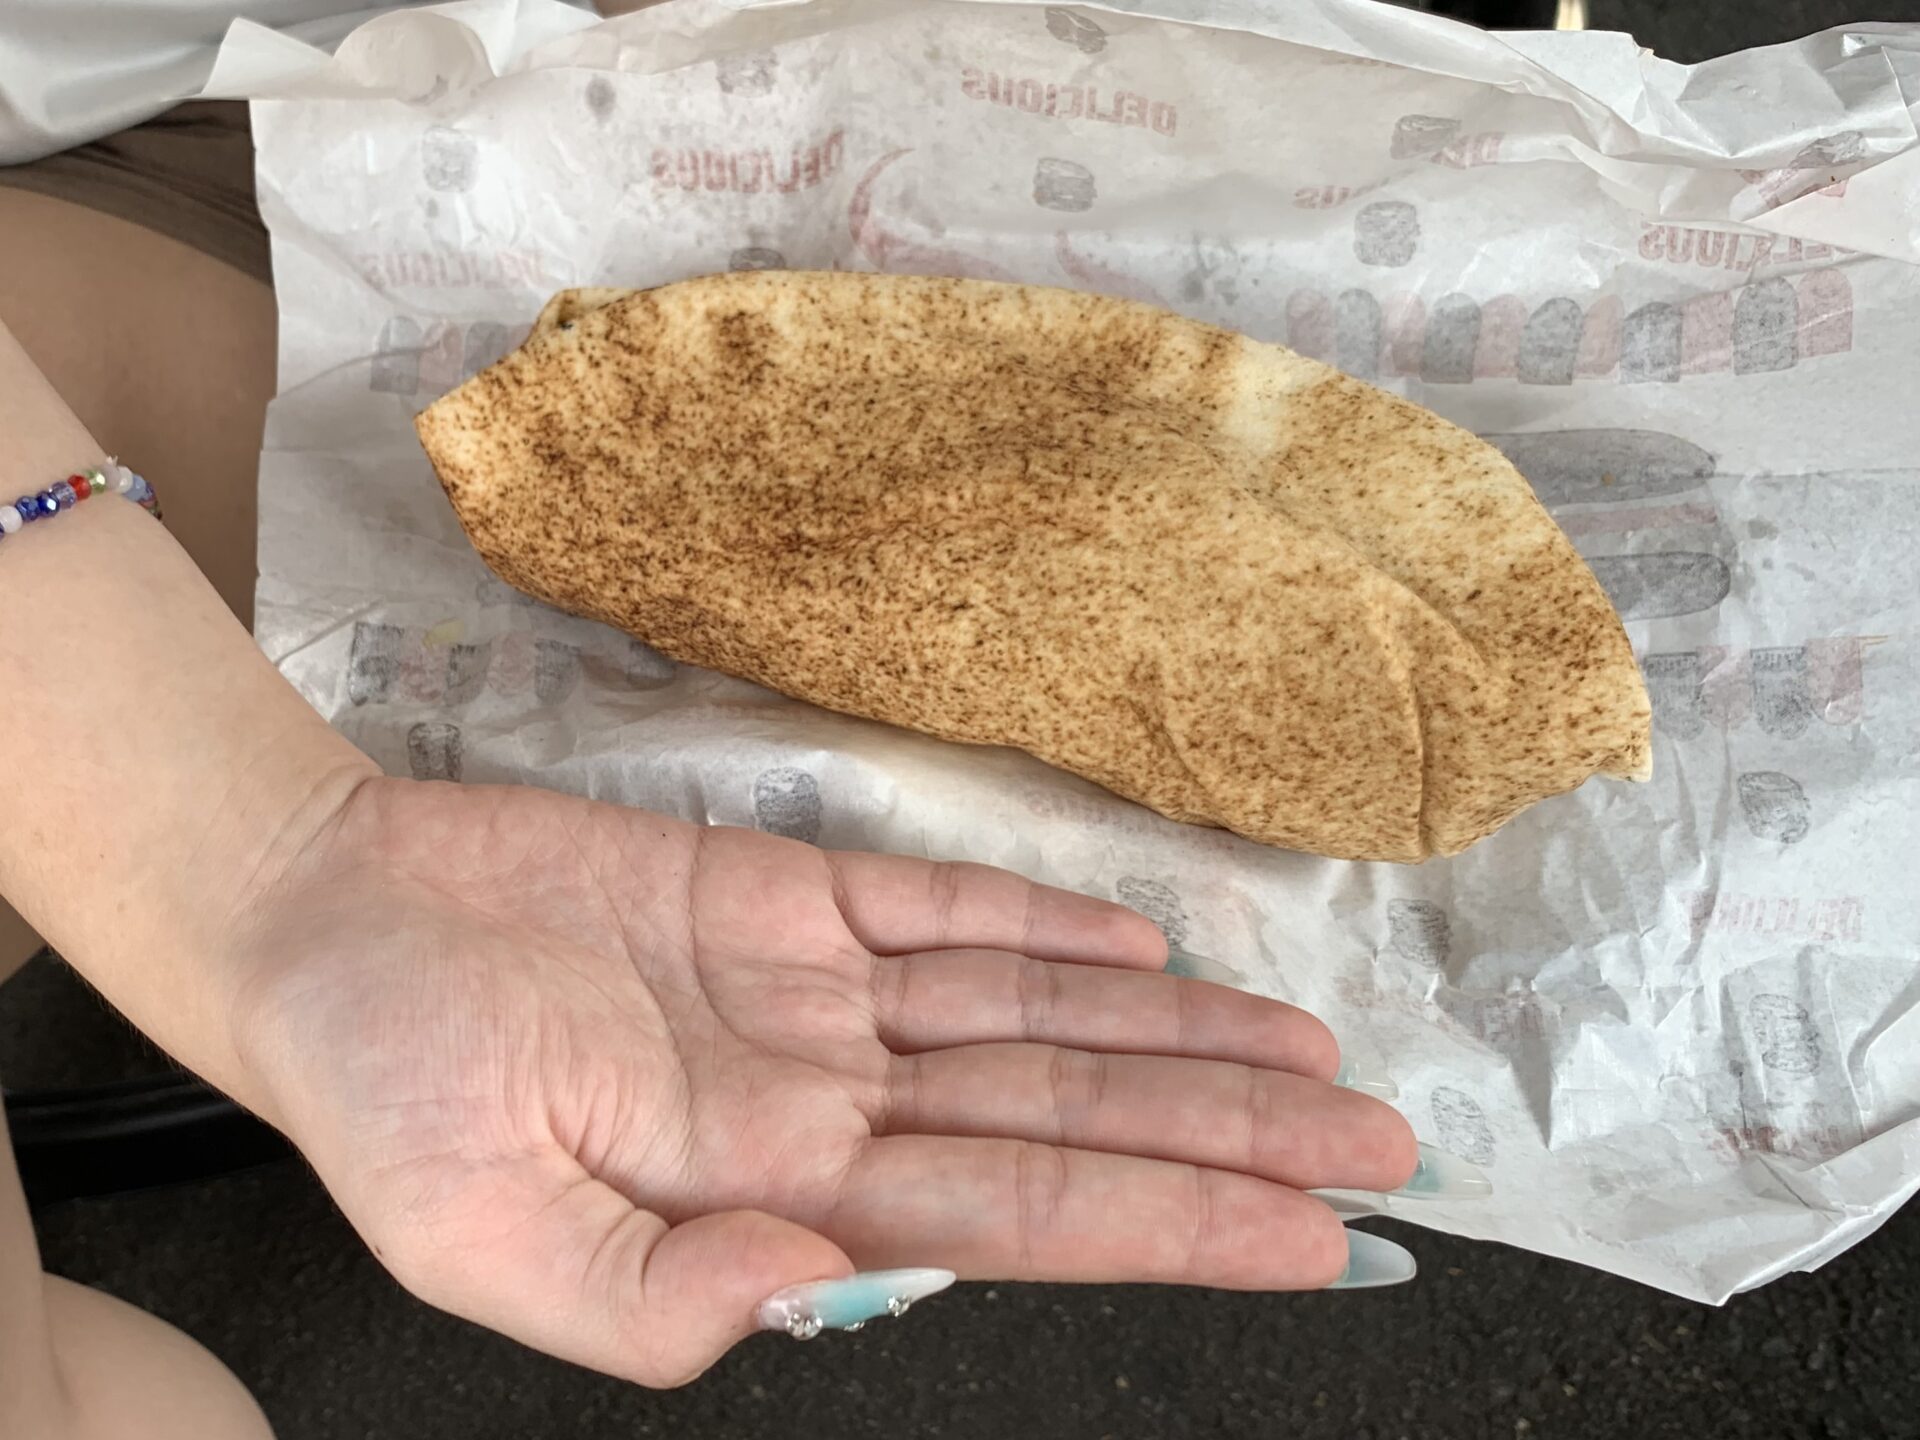 Dhon Burger - Size comparison between hand and shawarma